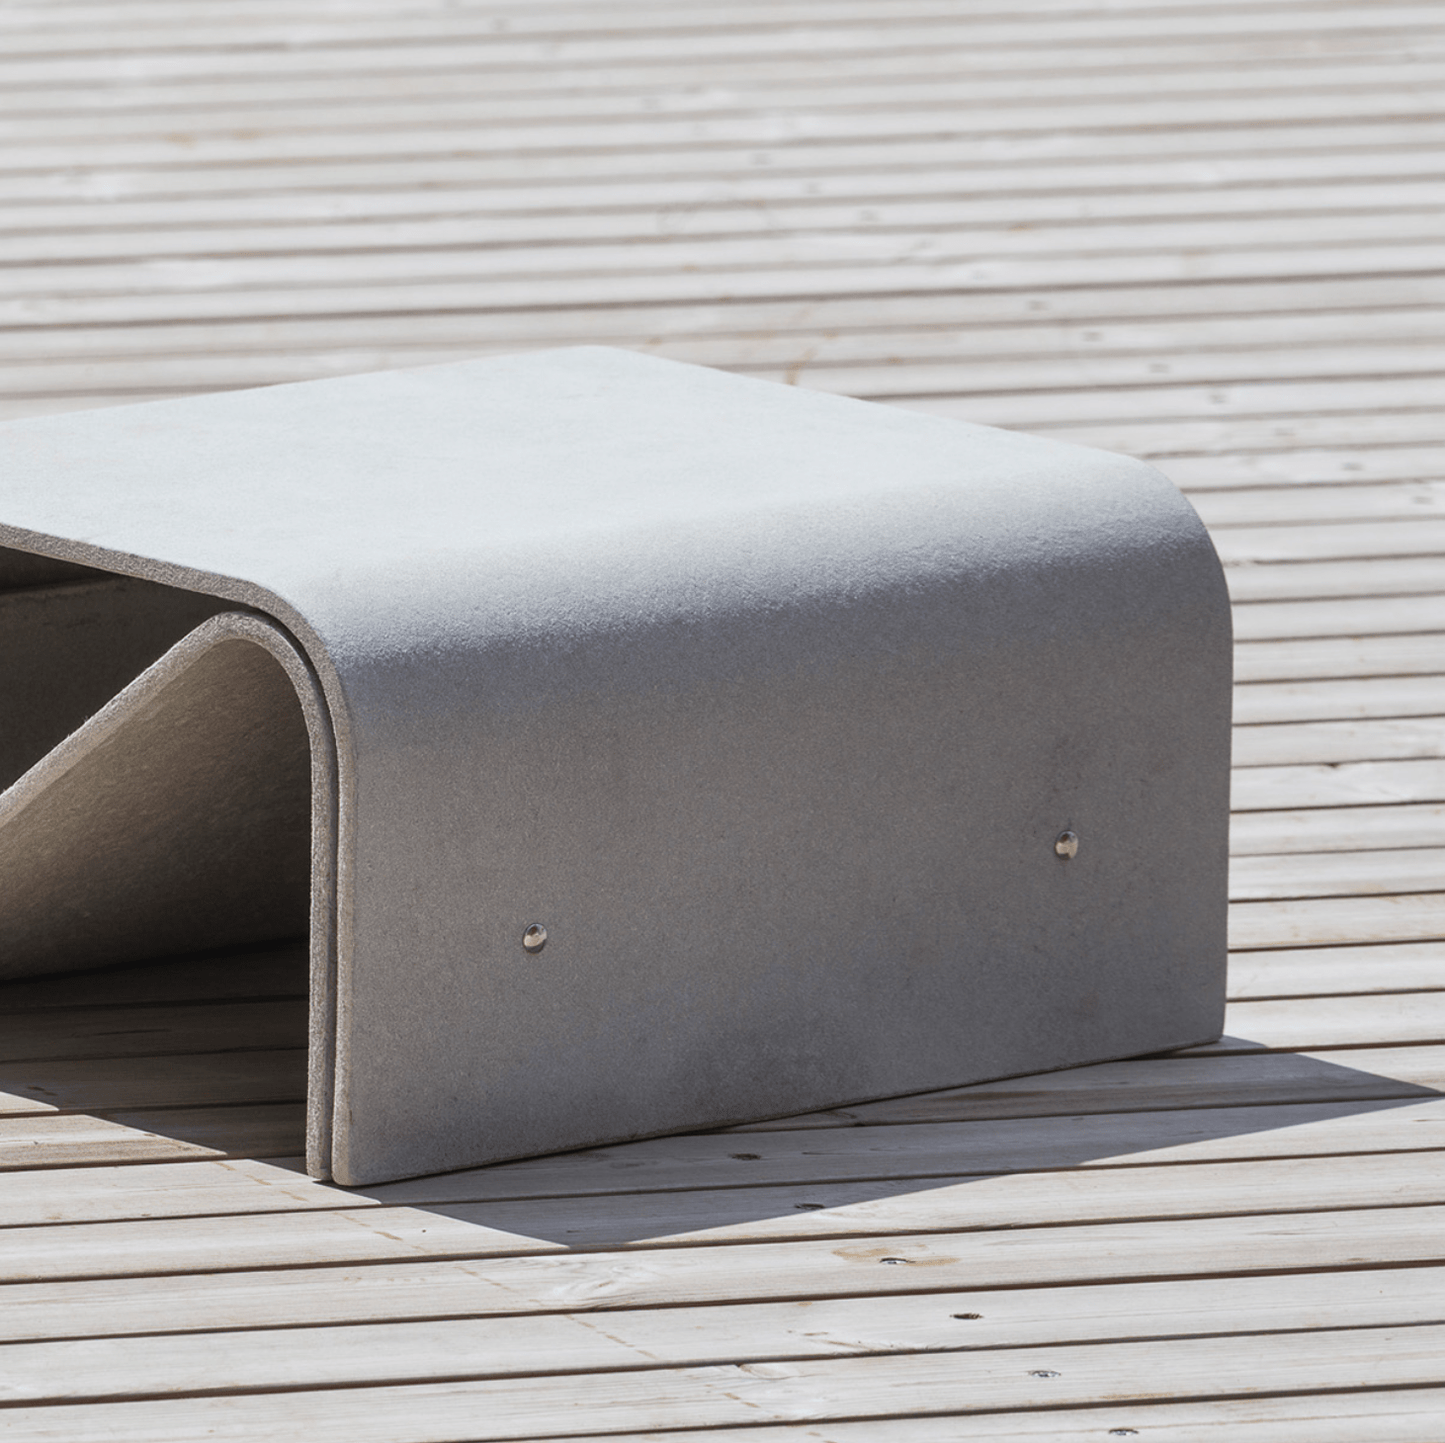 Close-up of the Sponeck Side Table / Foot Stool.